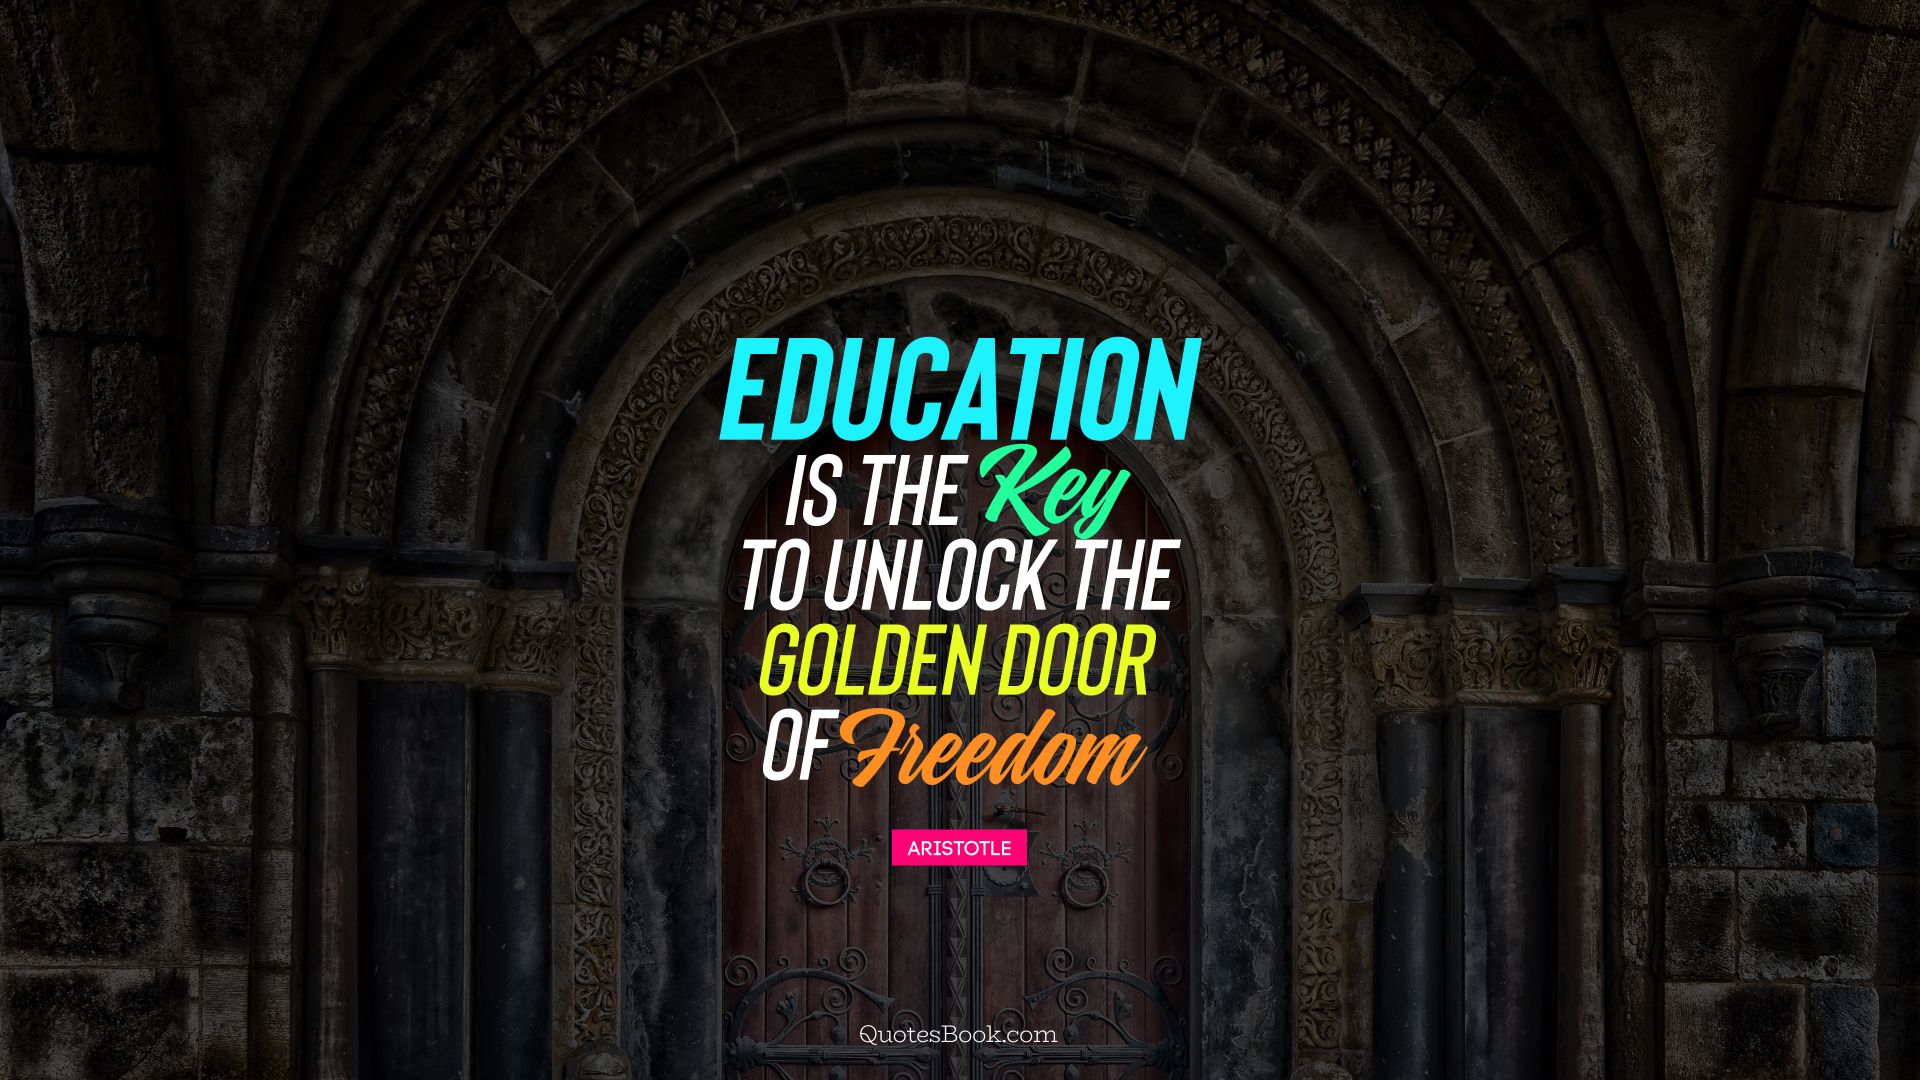 Education is the key to unlock the golden door of freedom. - Quote by Aristotle